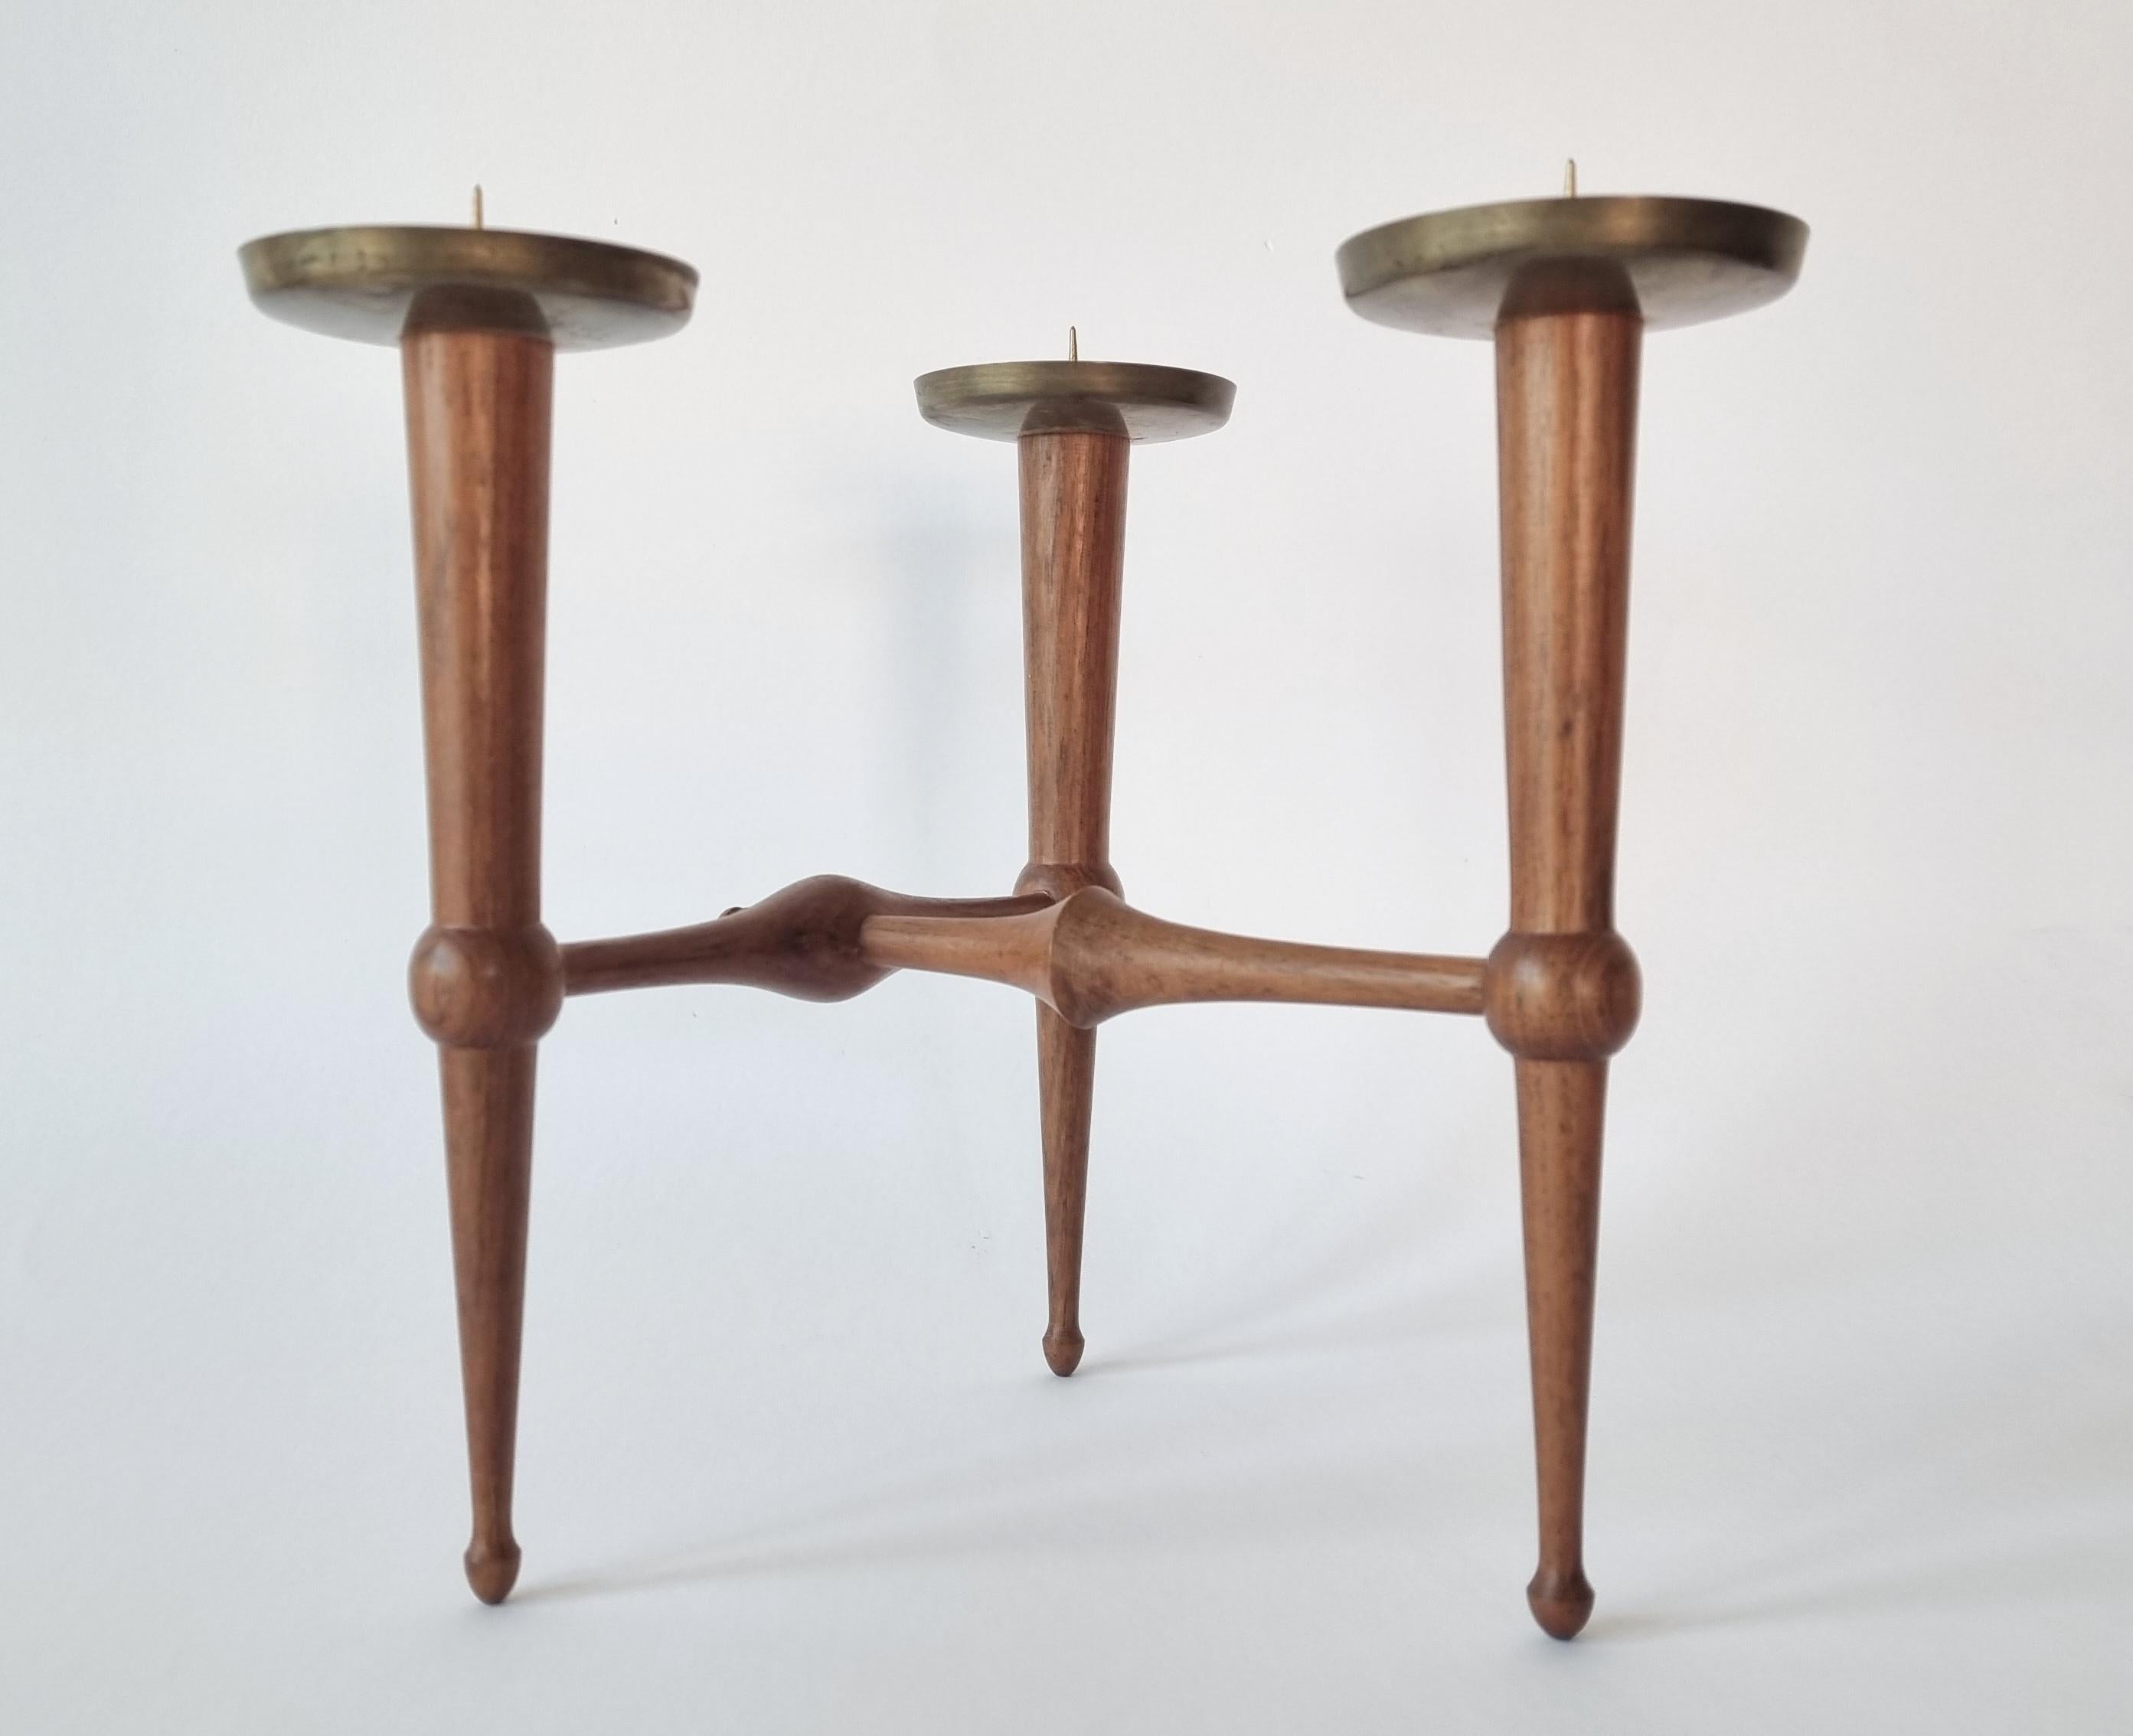 Midcentury Teak and Brass Rare Table Candle Holder / Stick, Denmark, 1960s For Sale 7